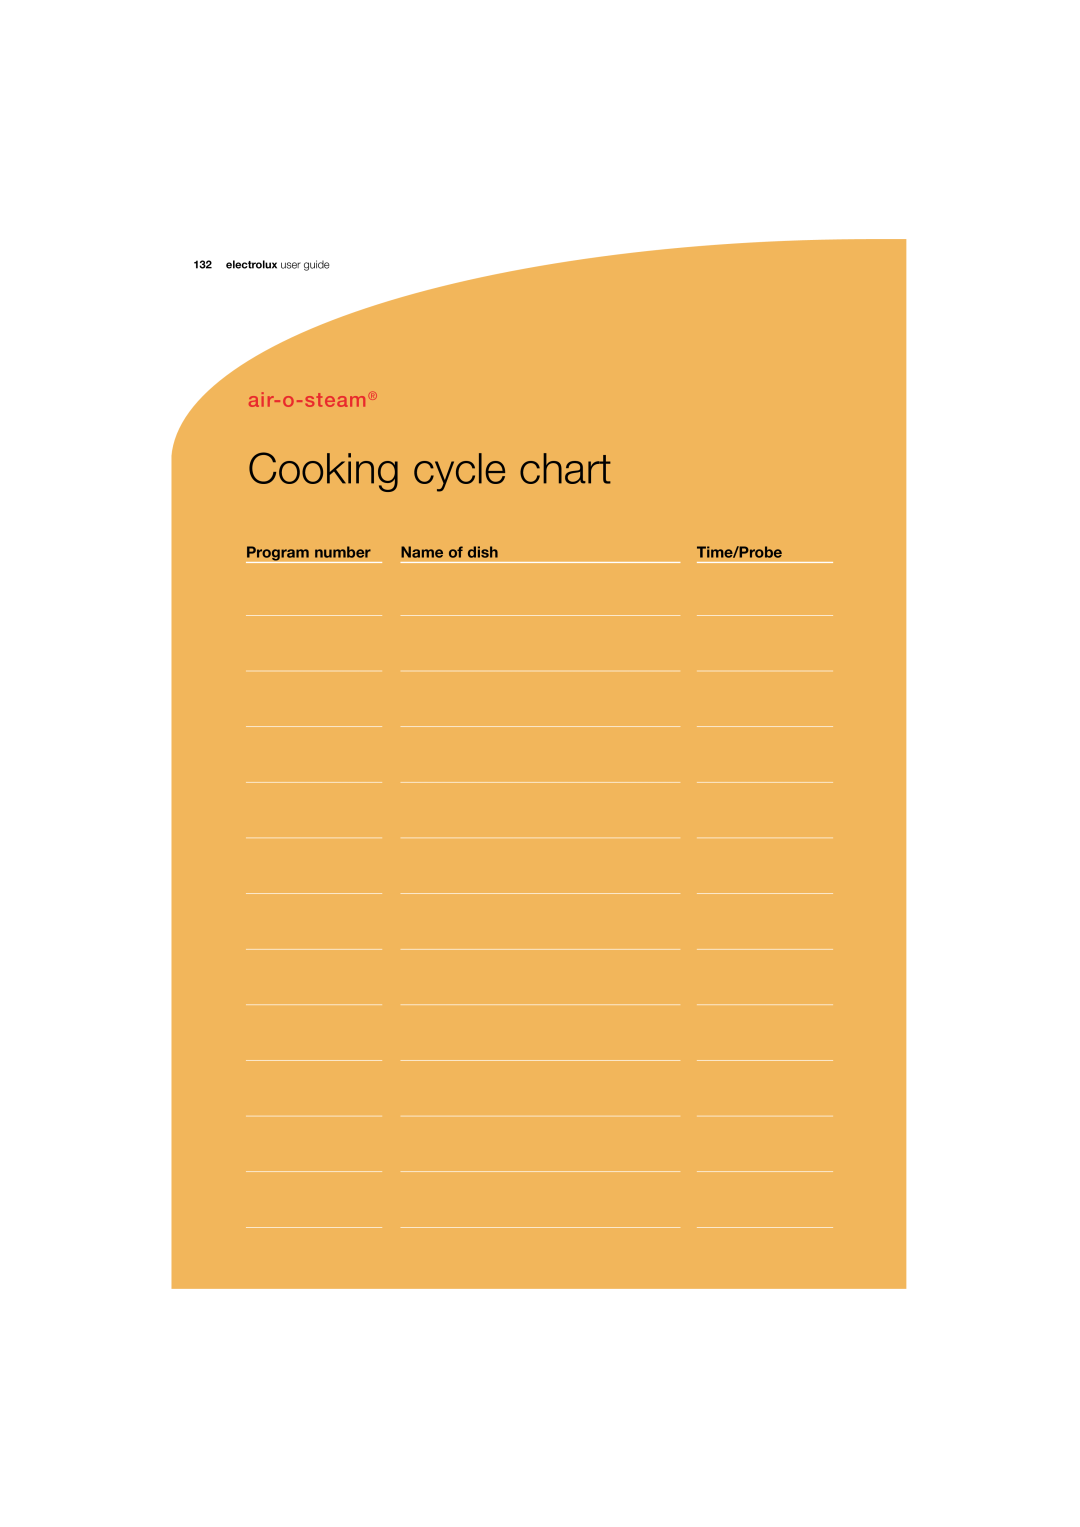 Electrolux 180 manual Cooking cycle chart, air-o-steam, Program number Name of dish, Time/Probe, electrolux user guide 